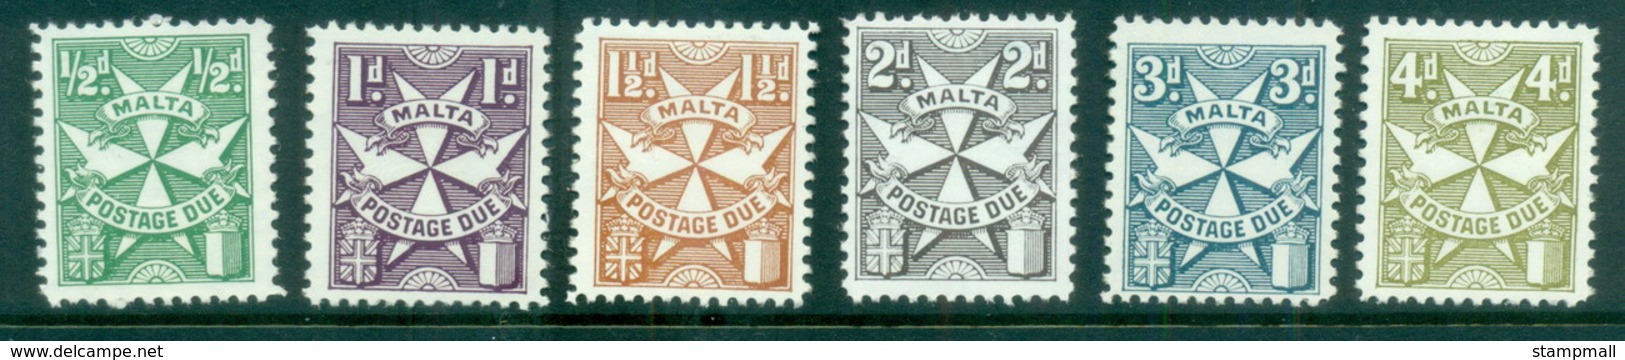 Malta 1953-57 Postage Dues Chalky Paper MLH - Malta